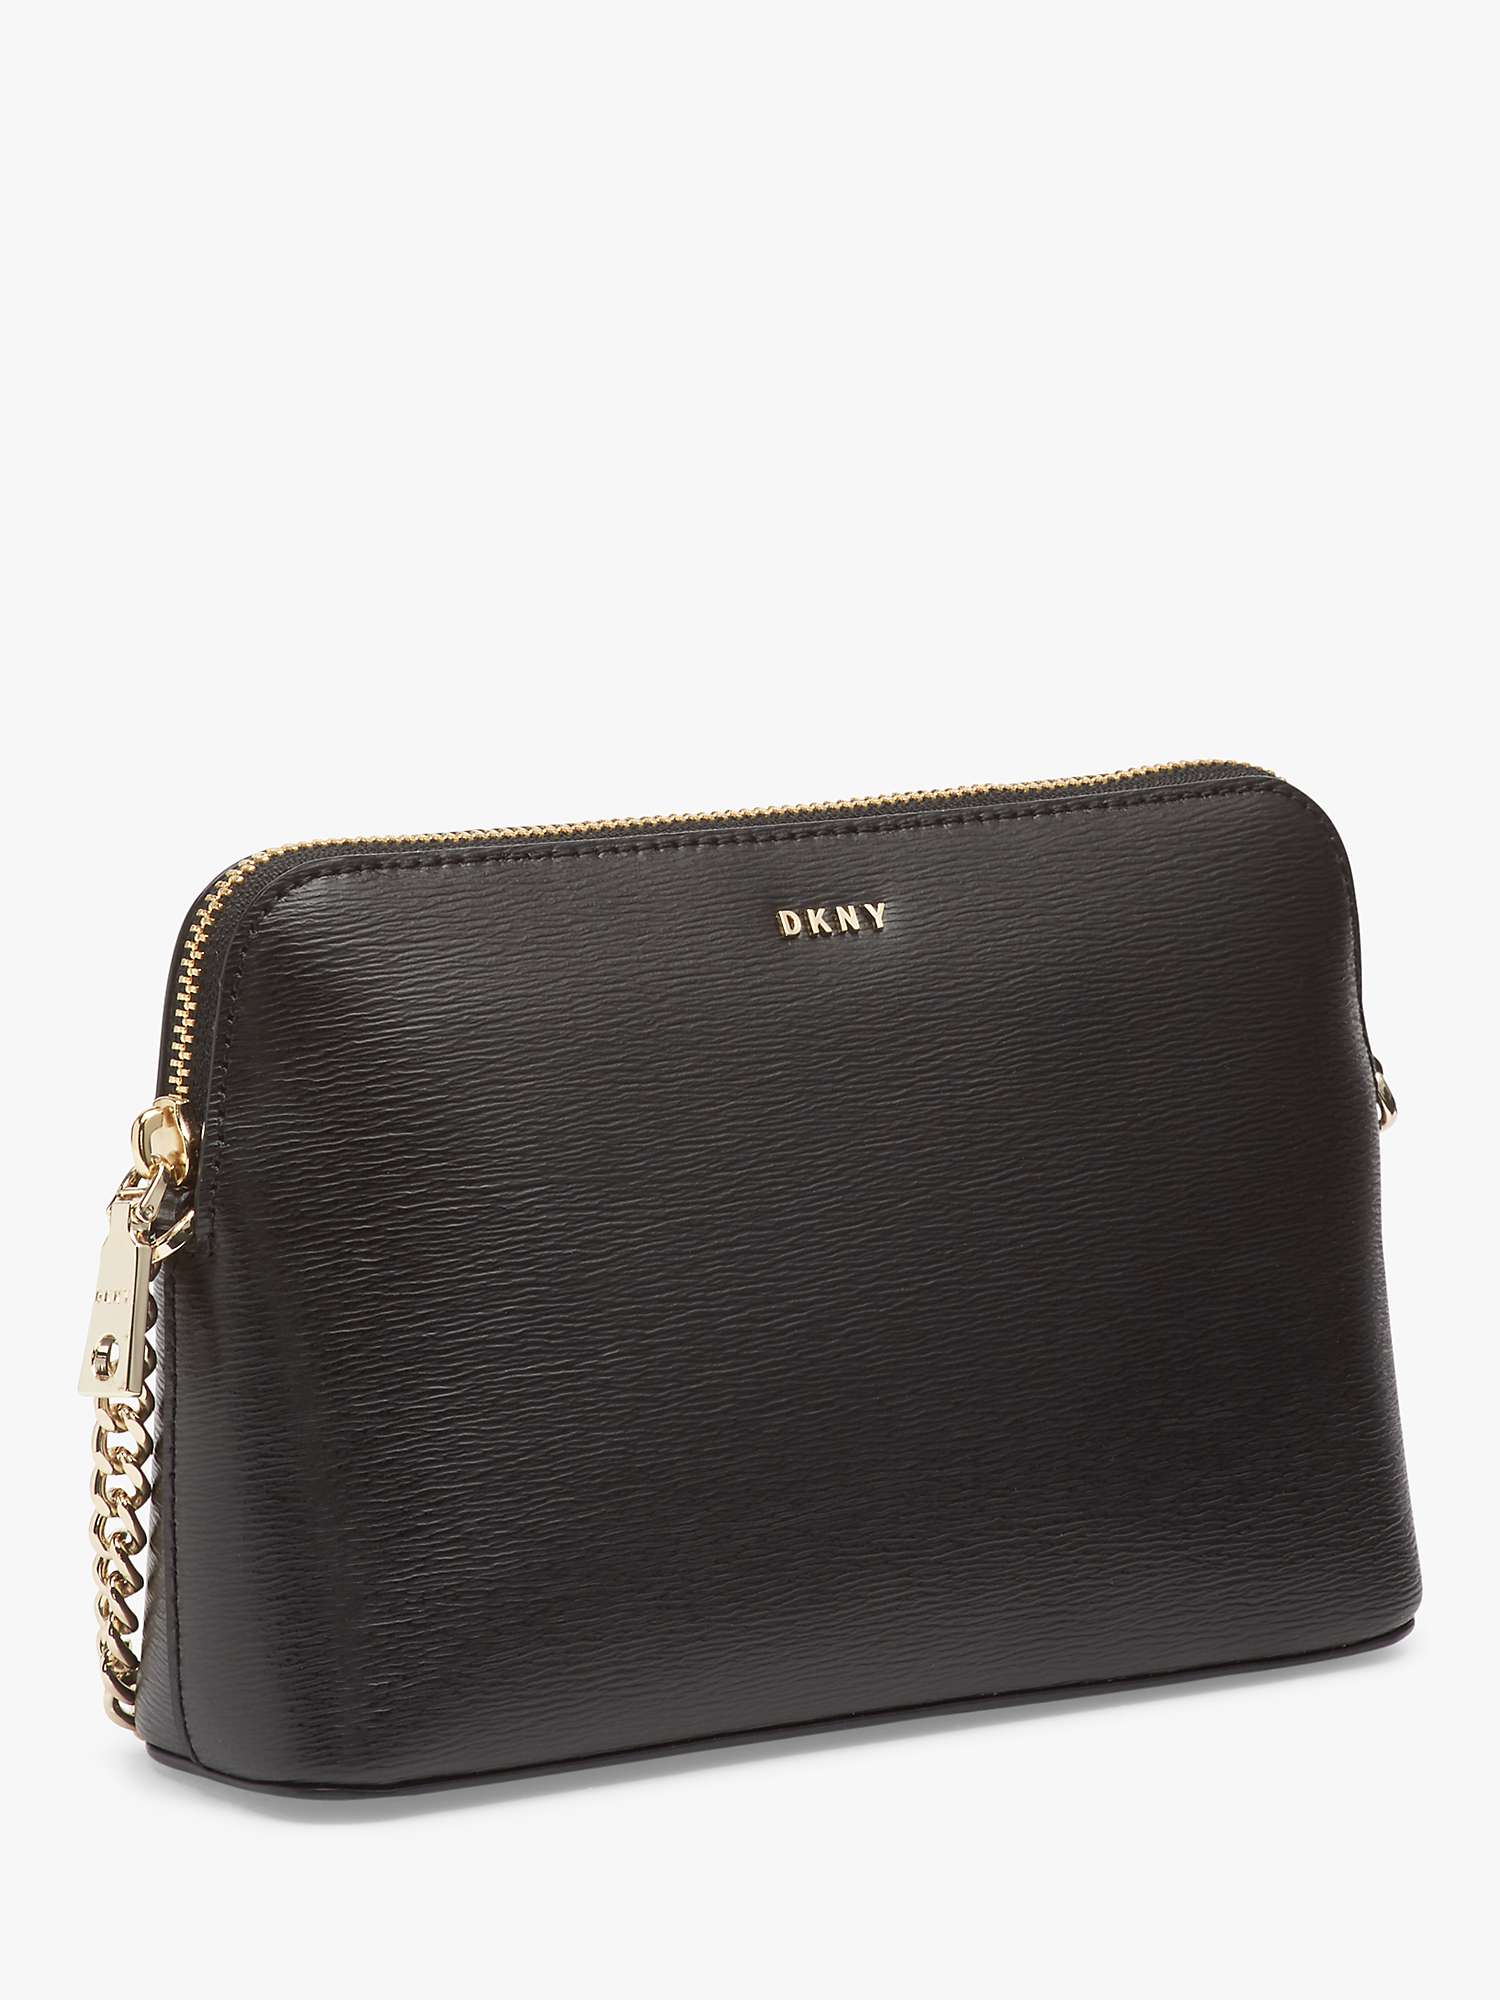 Buy DKNY Bryant Dome Leather Cross Body Bag Online at johnlewis.com